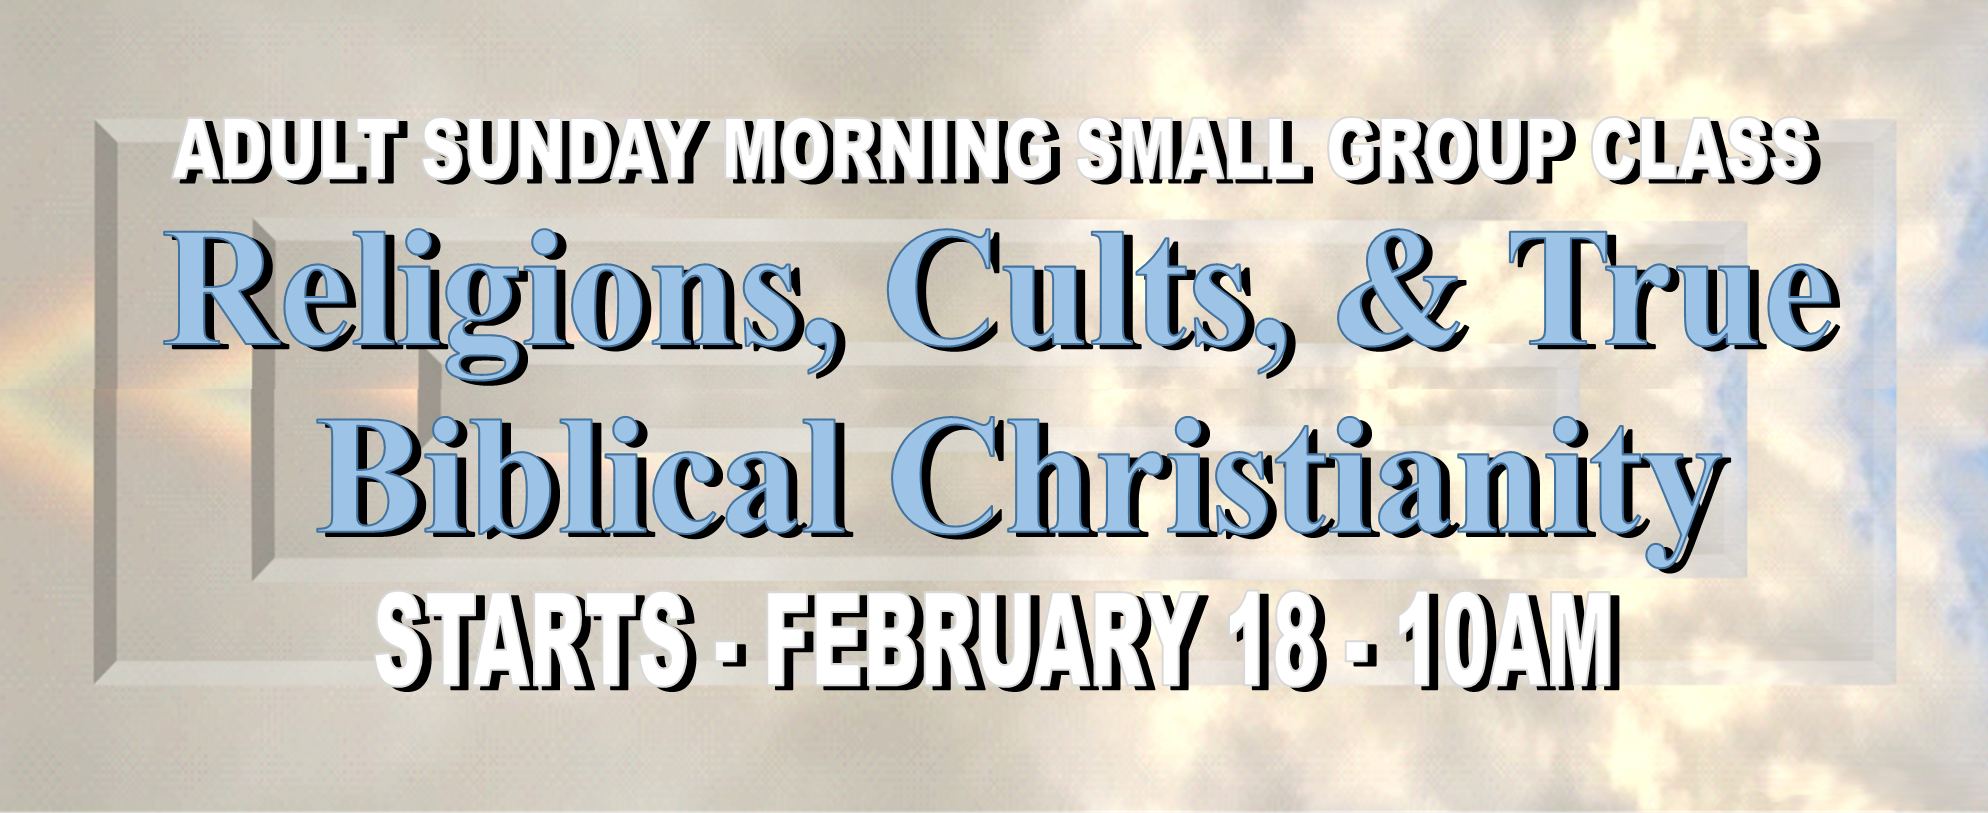 SMALL GROUP CLASS 2-18-24 - RELIGIONS, CULTS, & TRUTH BIBLICAL CHRISTIANITY